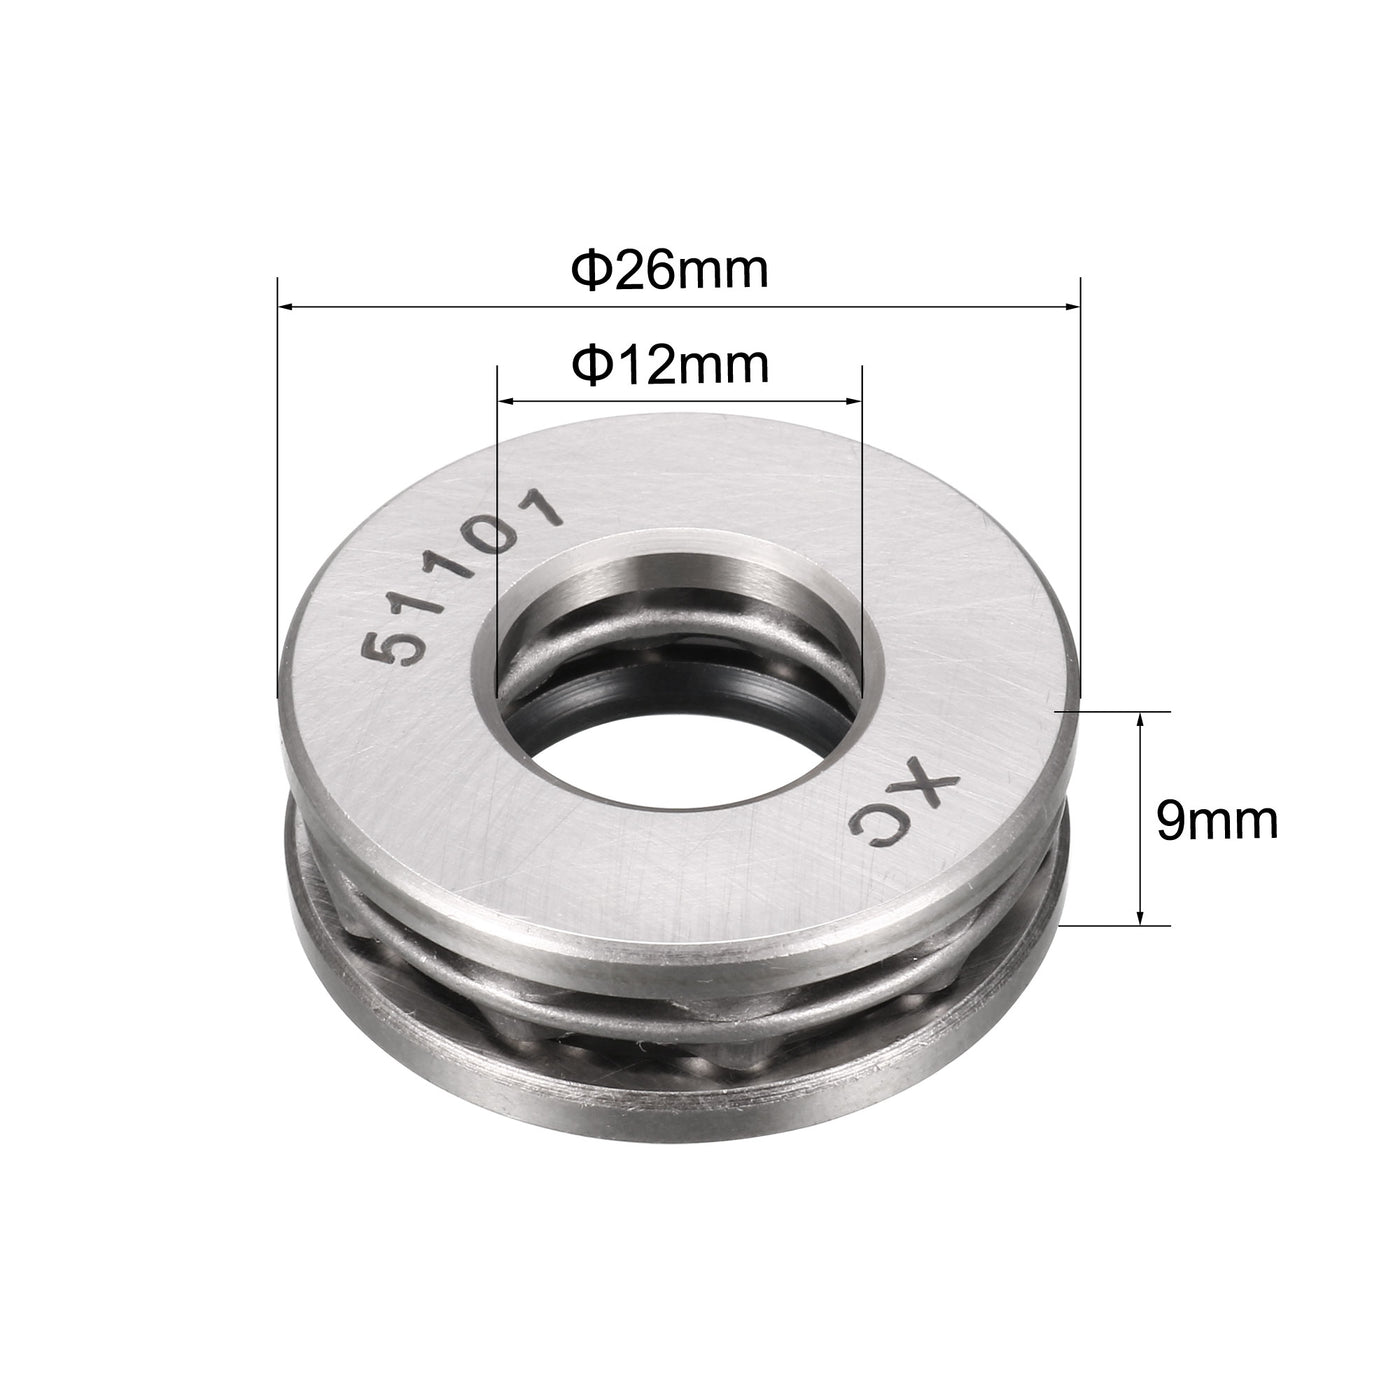 uxcell Uxcell 51101 Miniature Thrust Ball Bearing 12x26x9mm Chrome Steel with Washer 10pcs